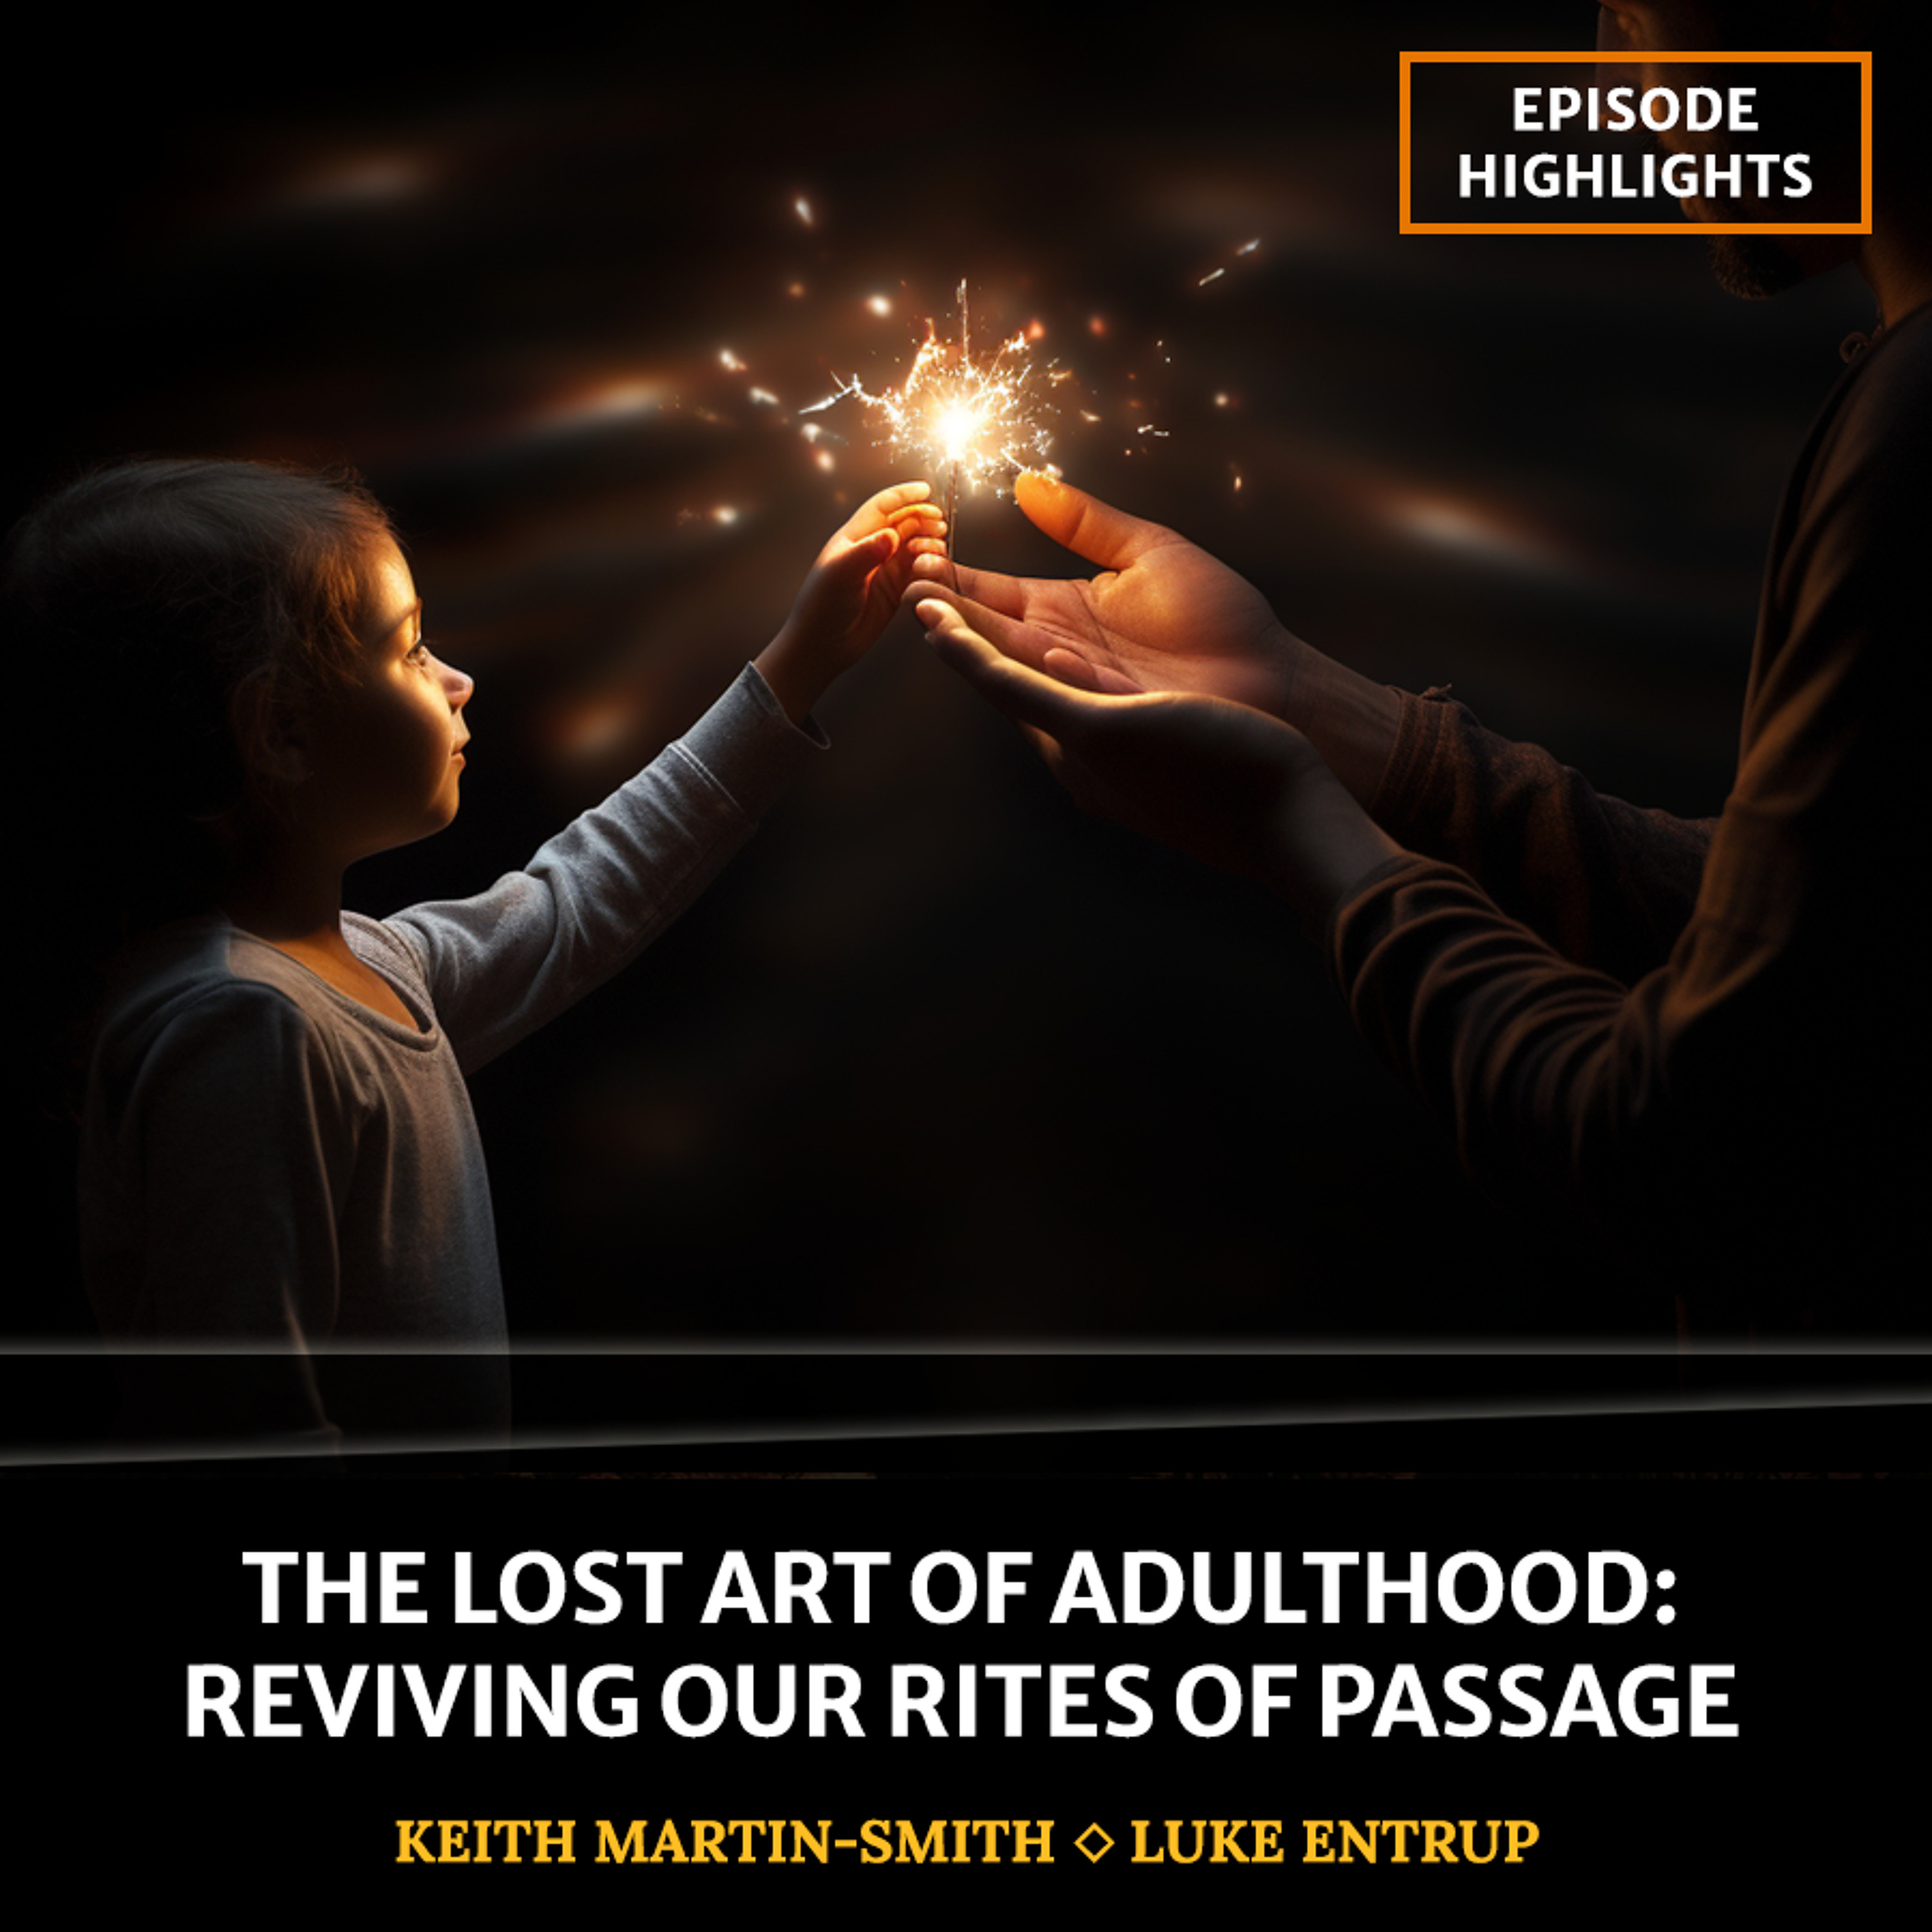 The Lost Art of Adulthood: Reviving Our Rites of Passage [PREVIEW]